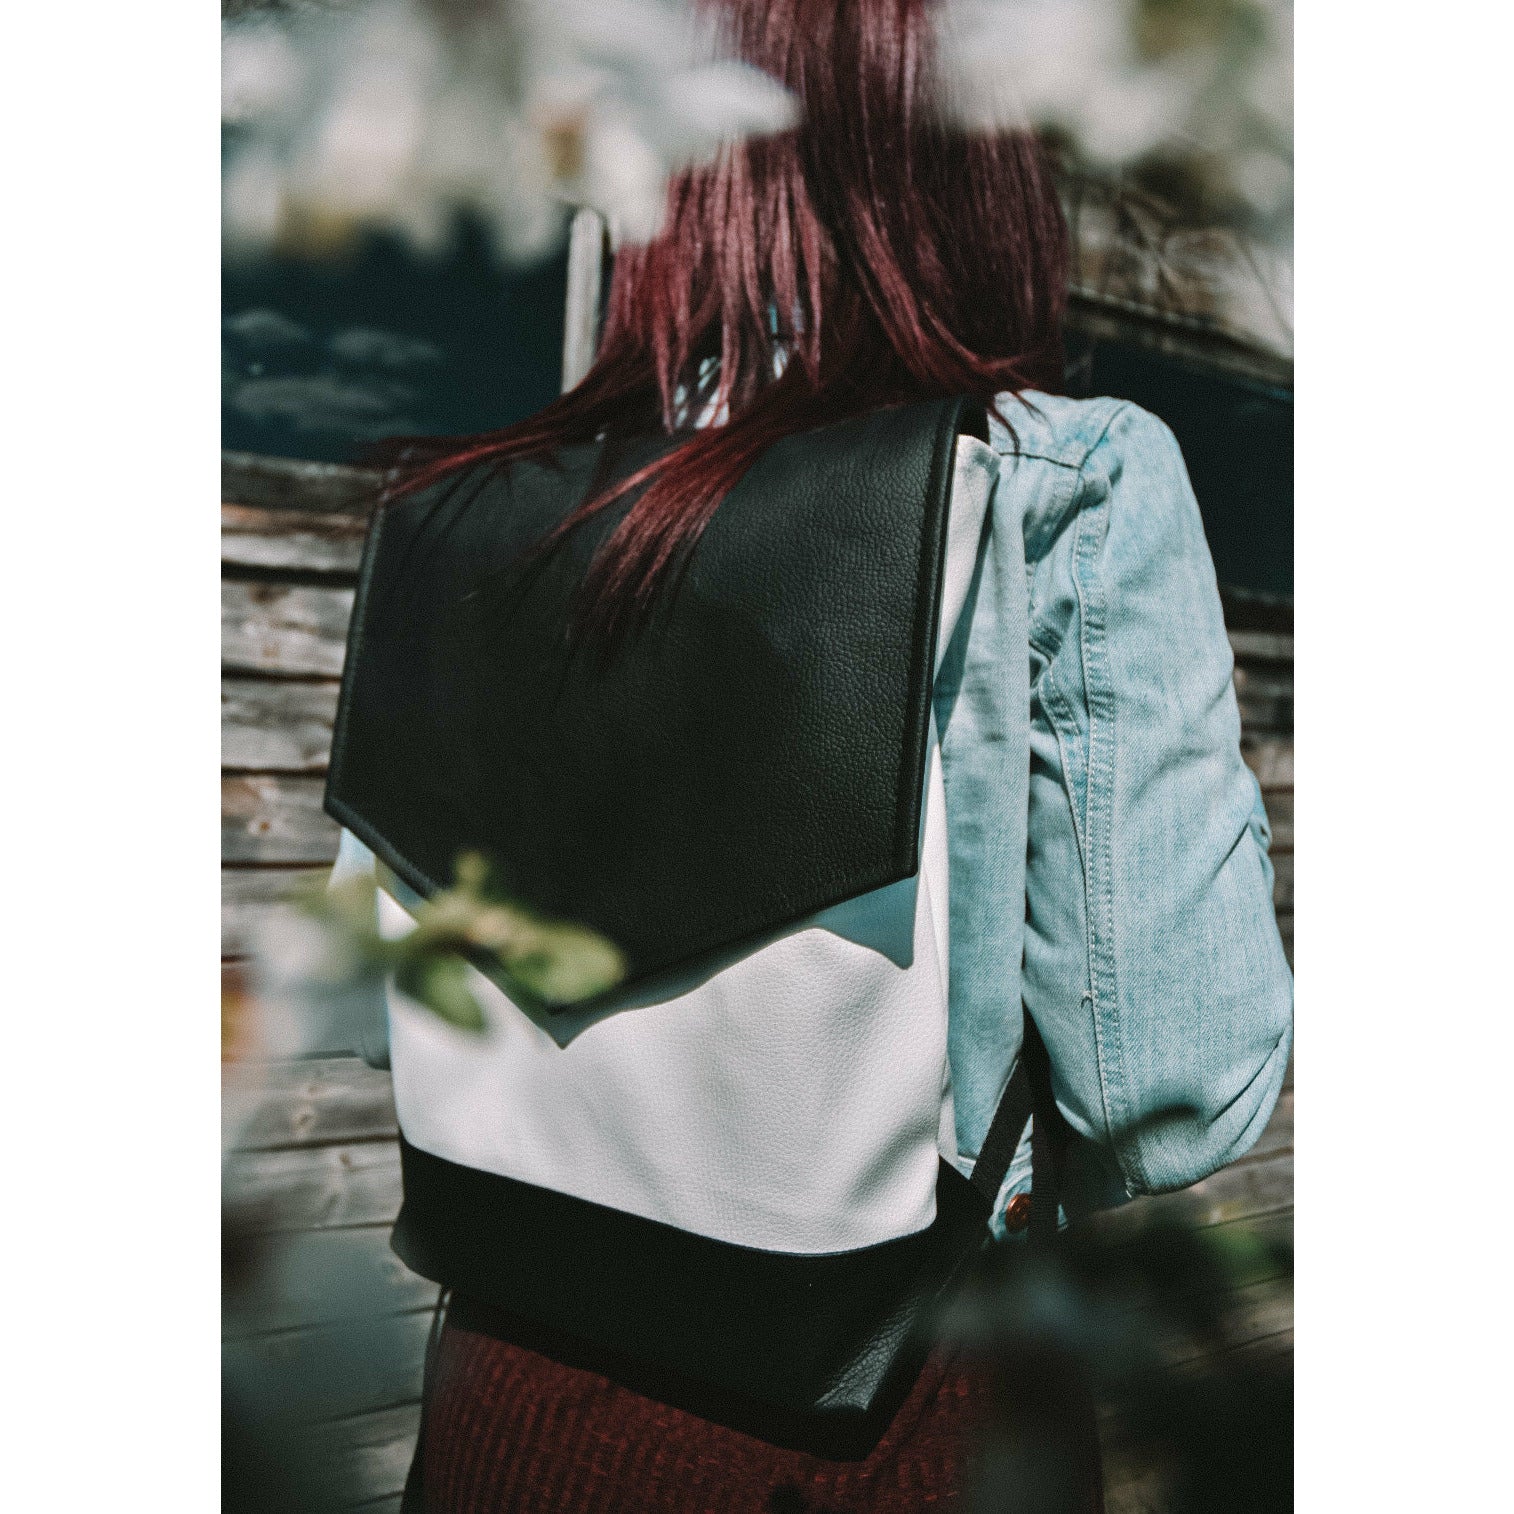 Deux Lux Backpack handbag - clothing & accessories - by owner